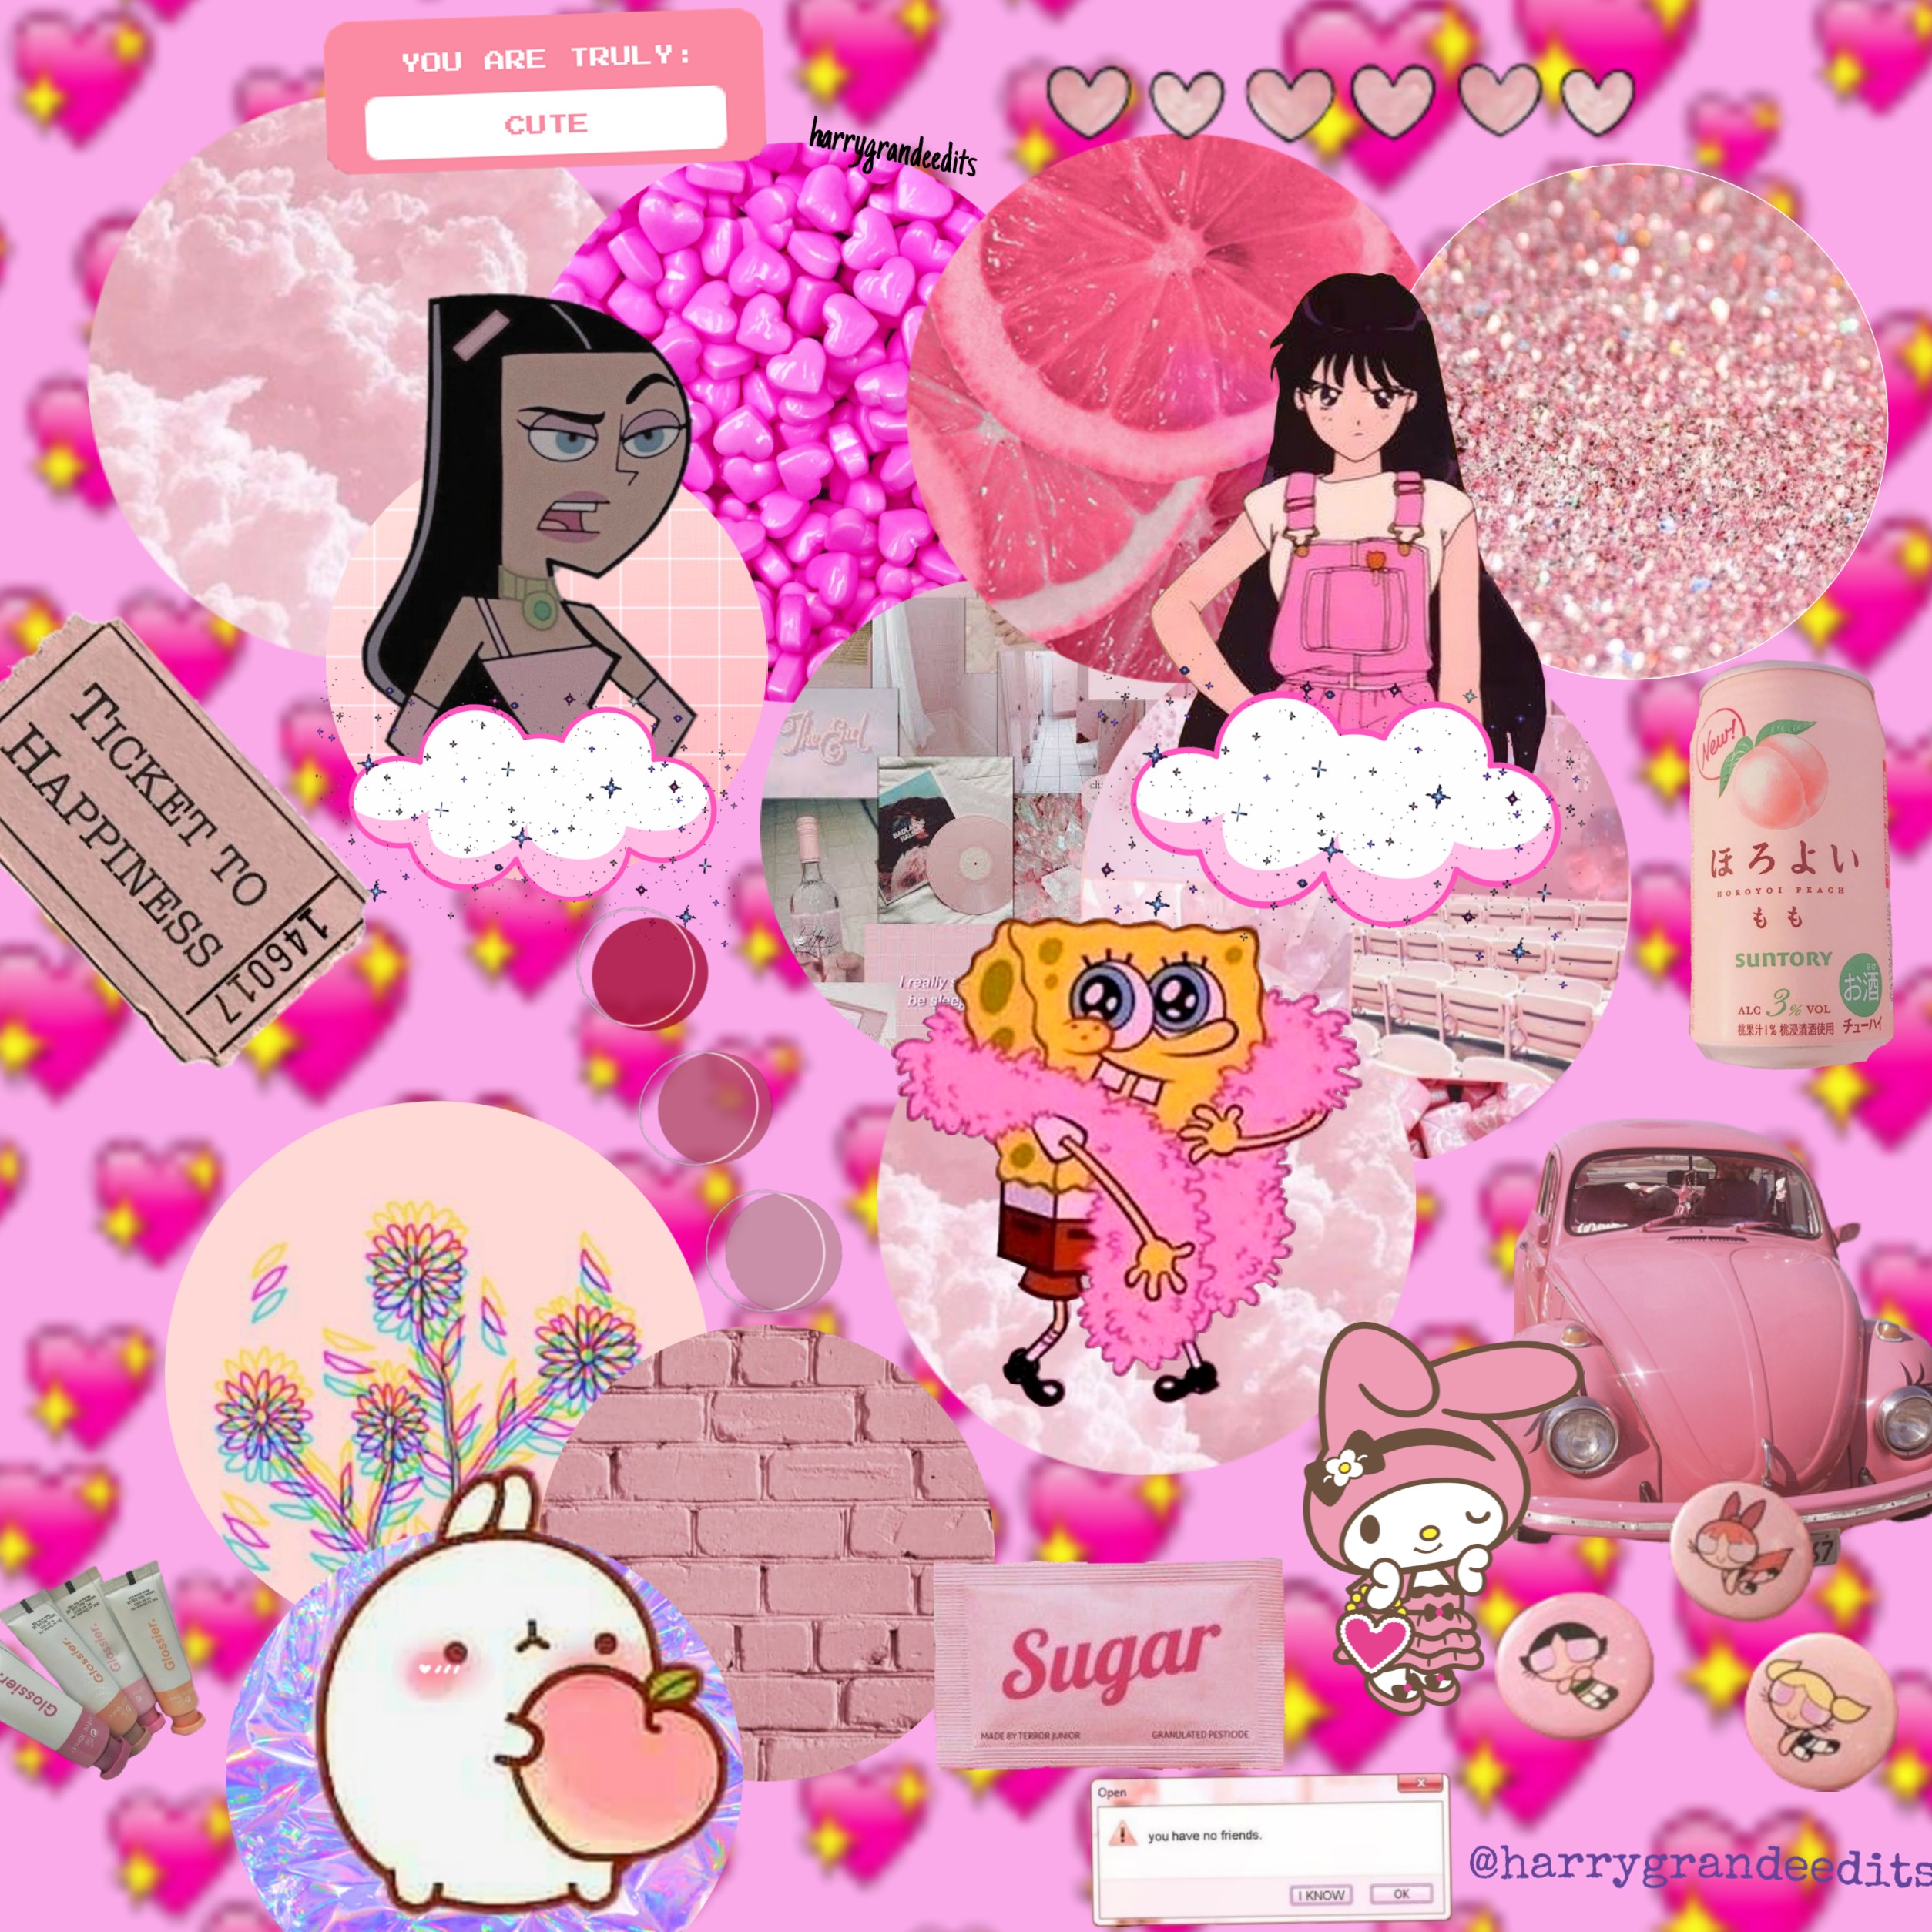 Pinky Aesthetic Pinkaesthtic Image By ℍ𝕖𝕝𝕝𝕠